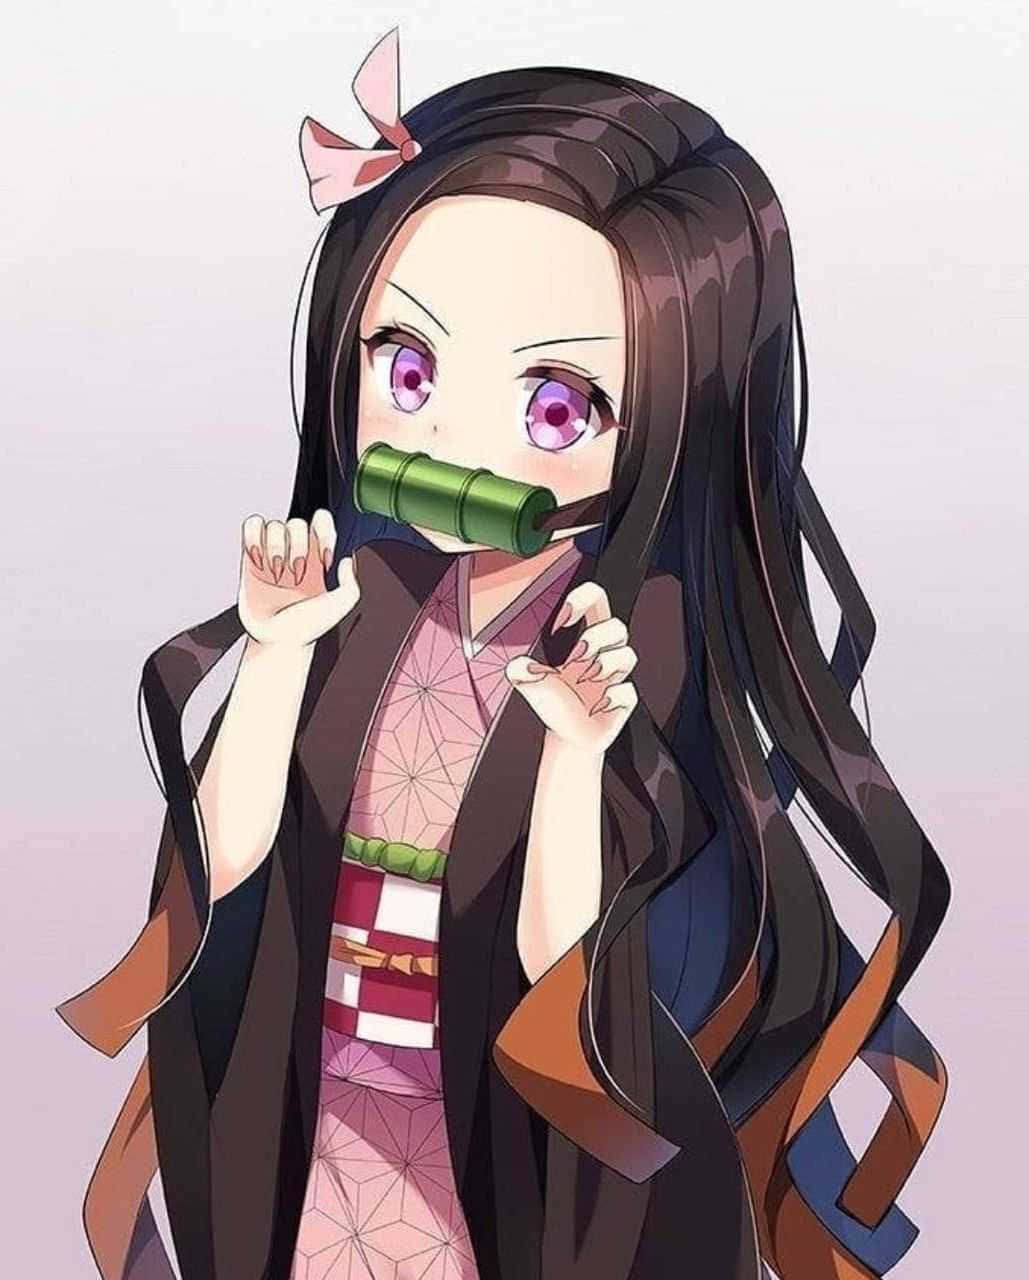 Nezuko's fierce will to protect her brother